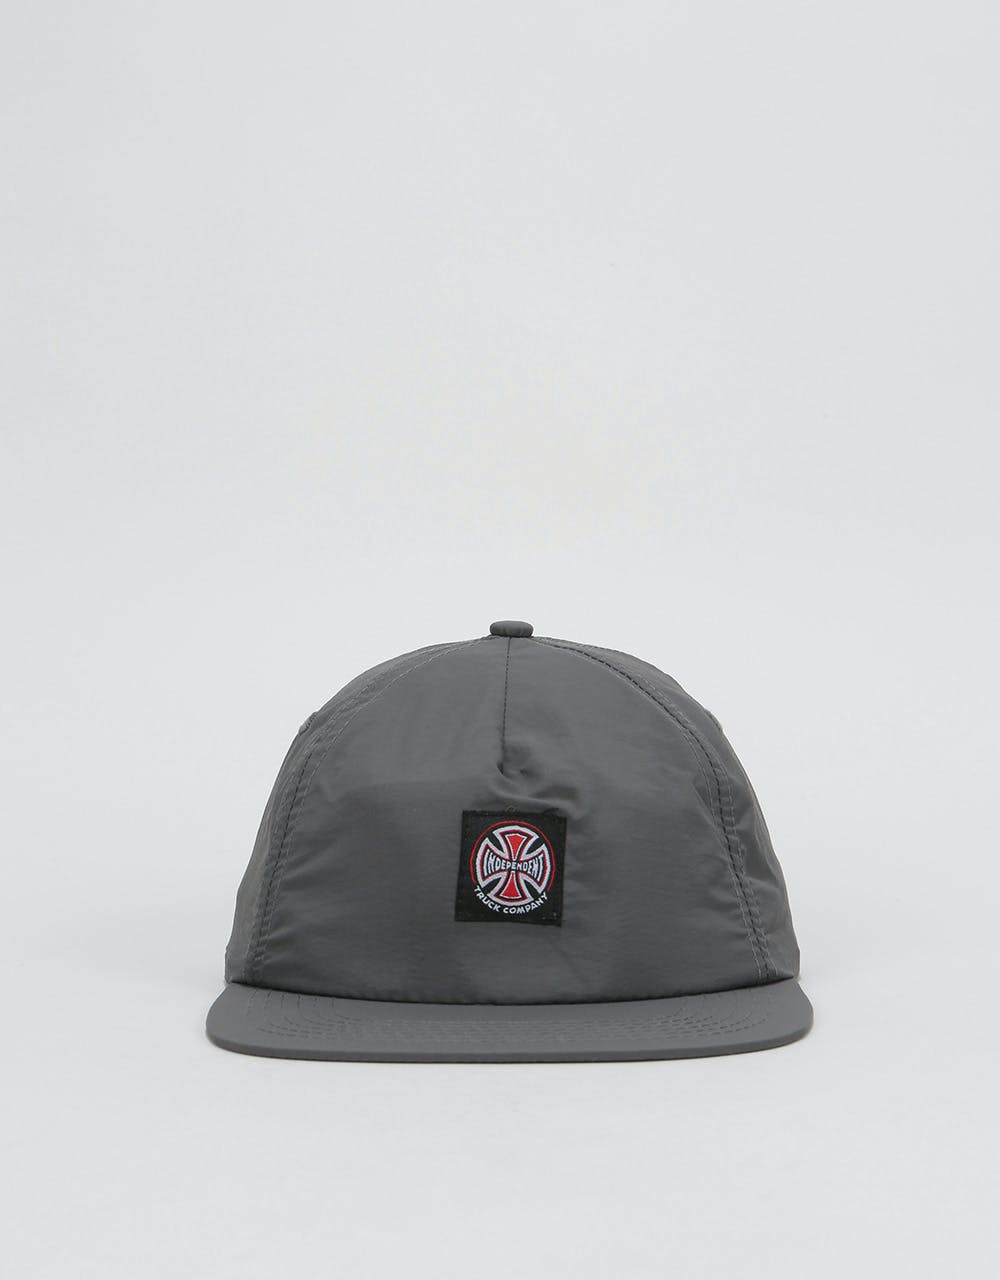 Independent Truck Co. Label Strapback Cap - Charcoal Heather